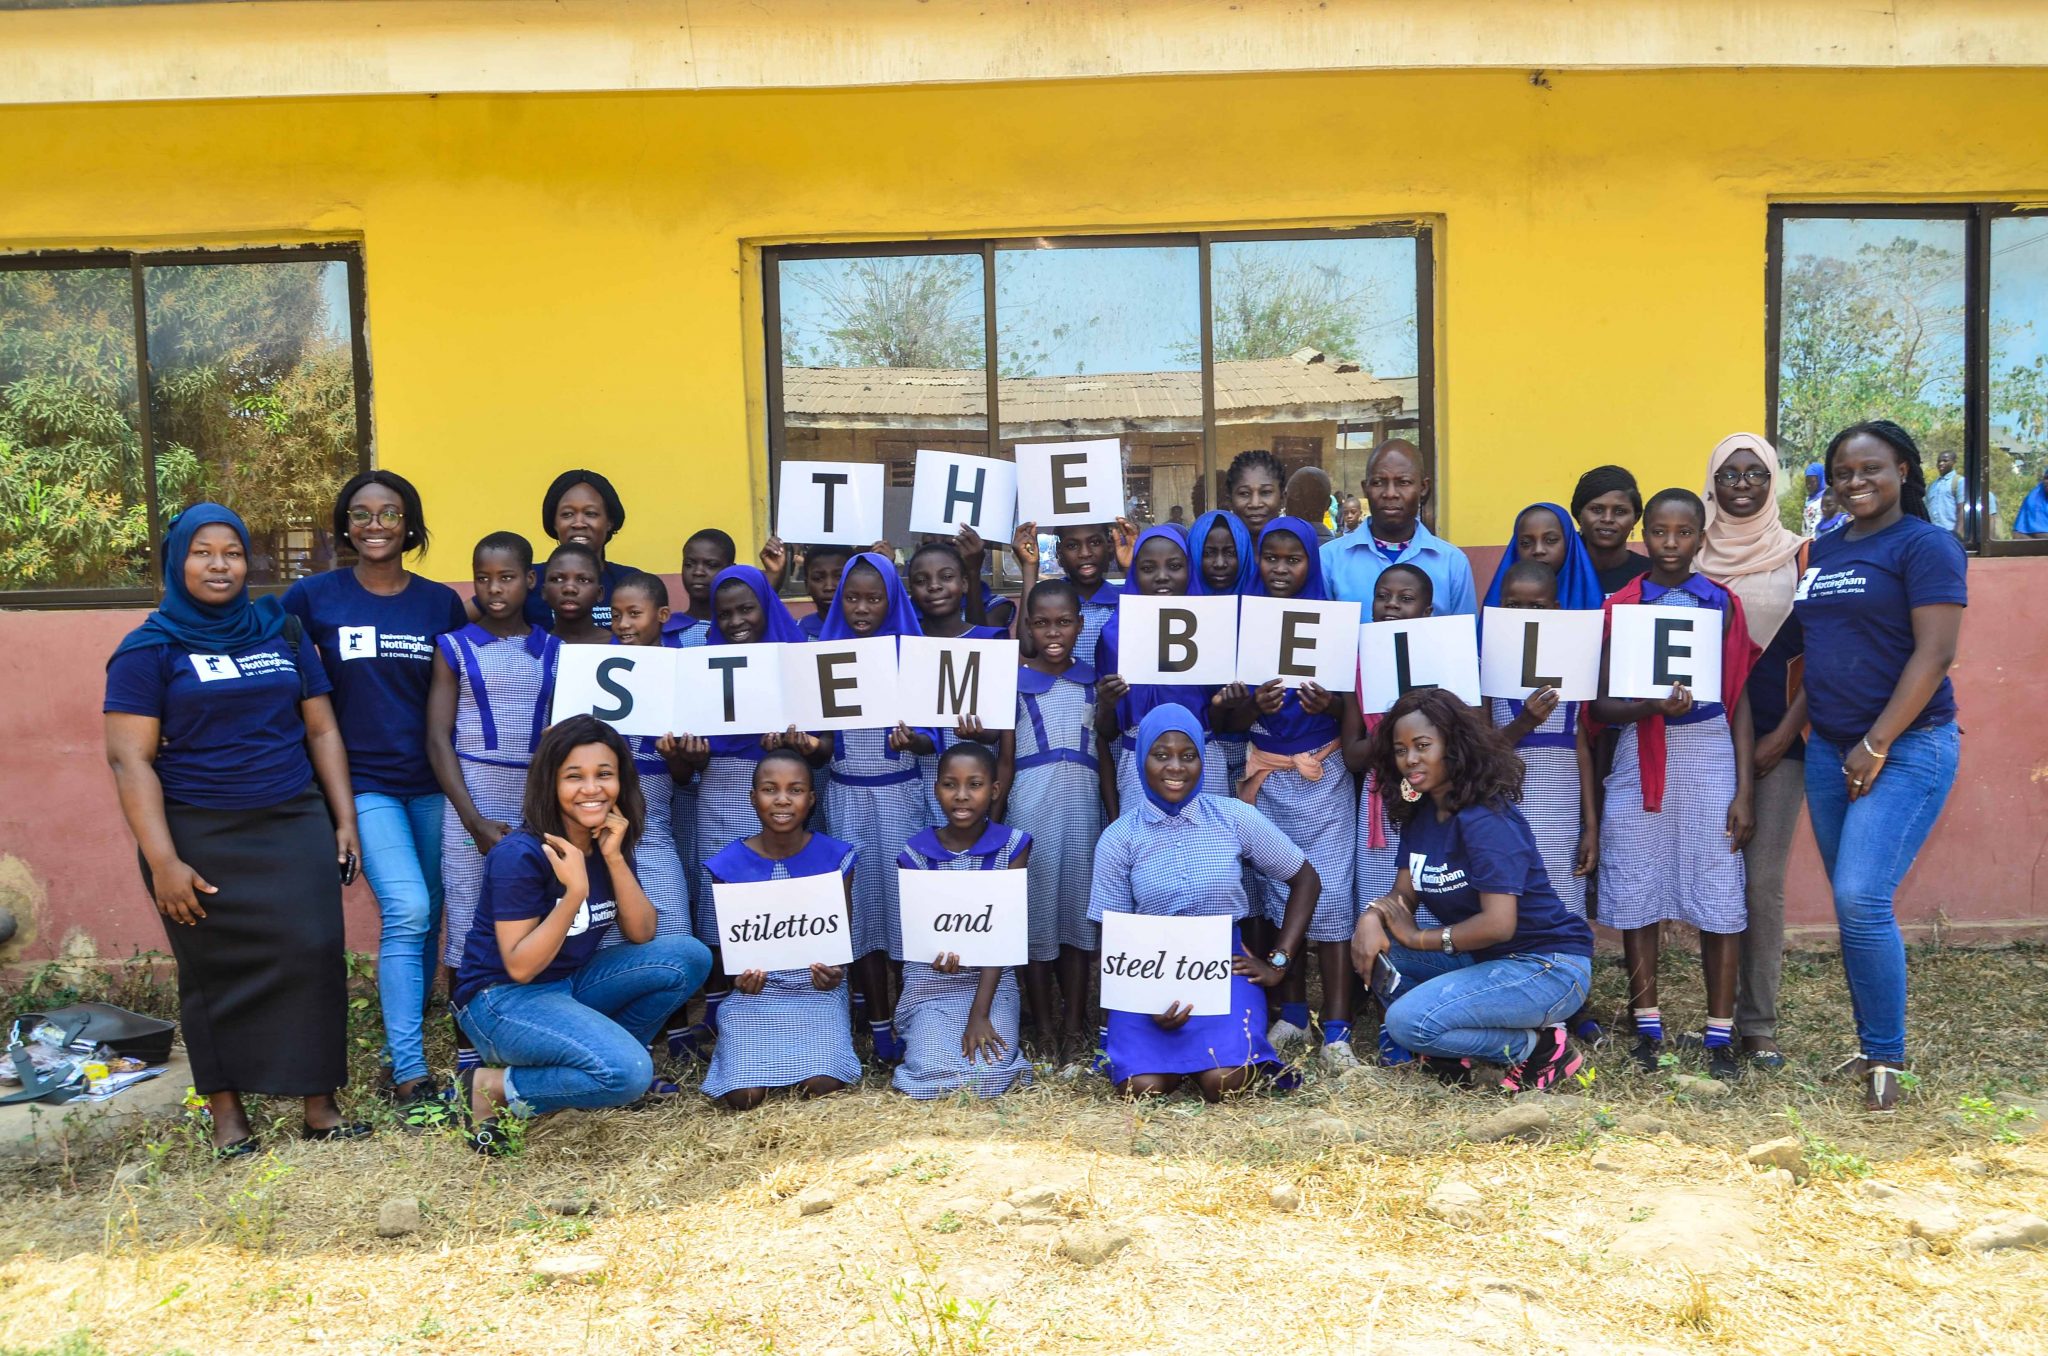 A group of young girls posing posing for a photo and holding up a sign that reads the stem belle stilettos and steel toes